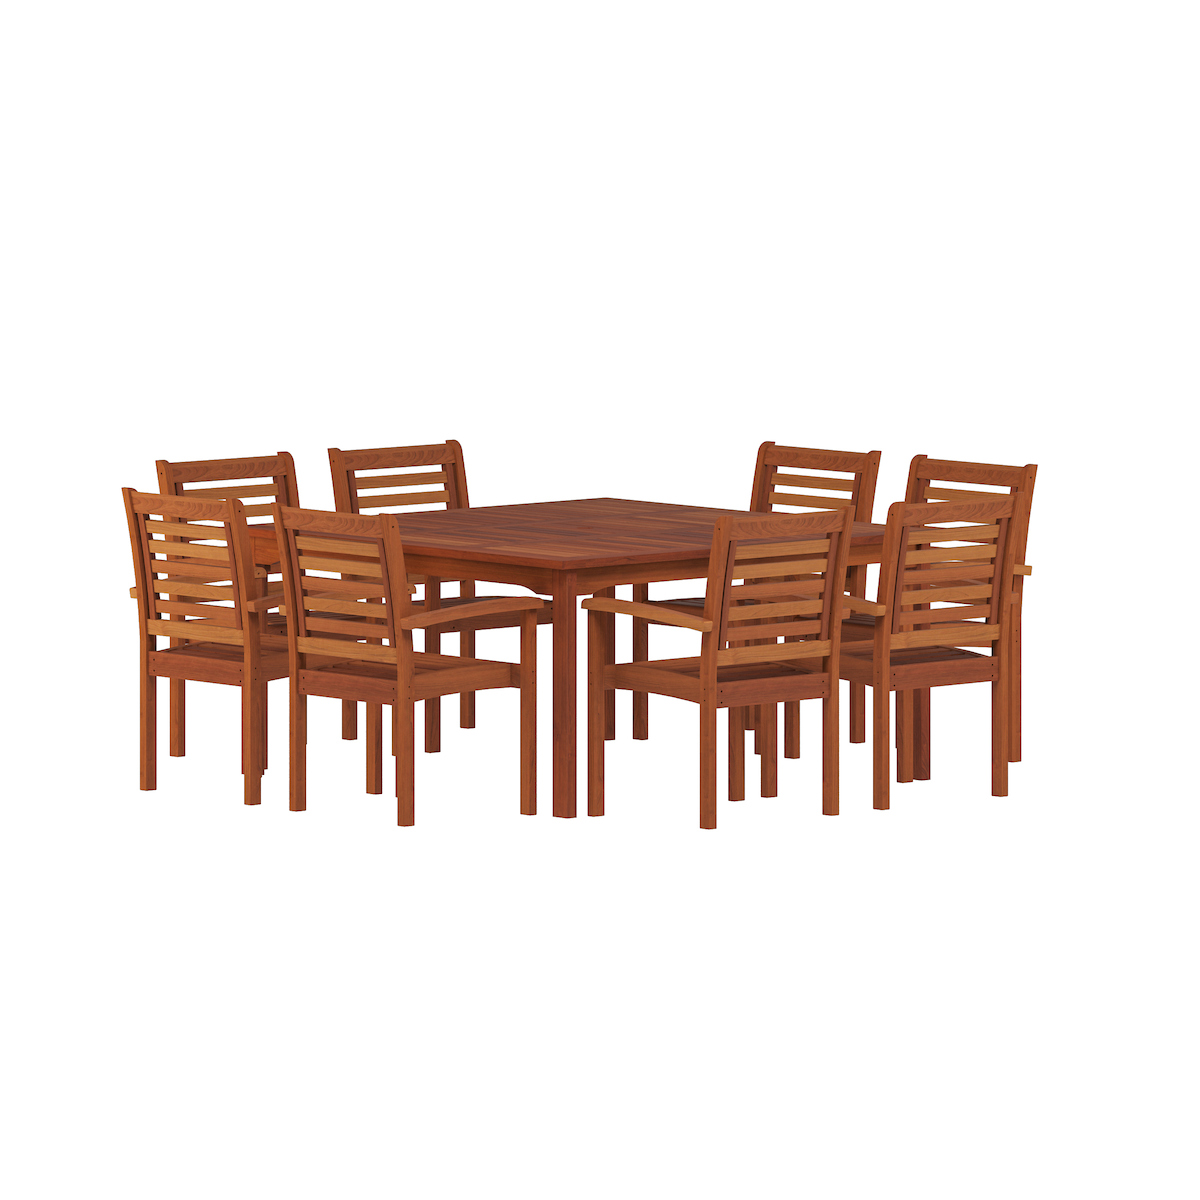 Milano 9-Piece Square Patio Dining Set, Solid Wood 100% FSC Certified - image 2 of 11